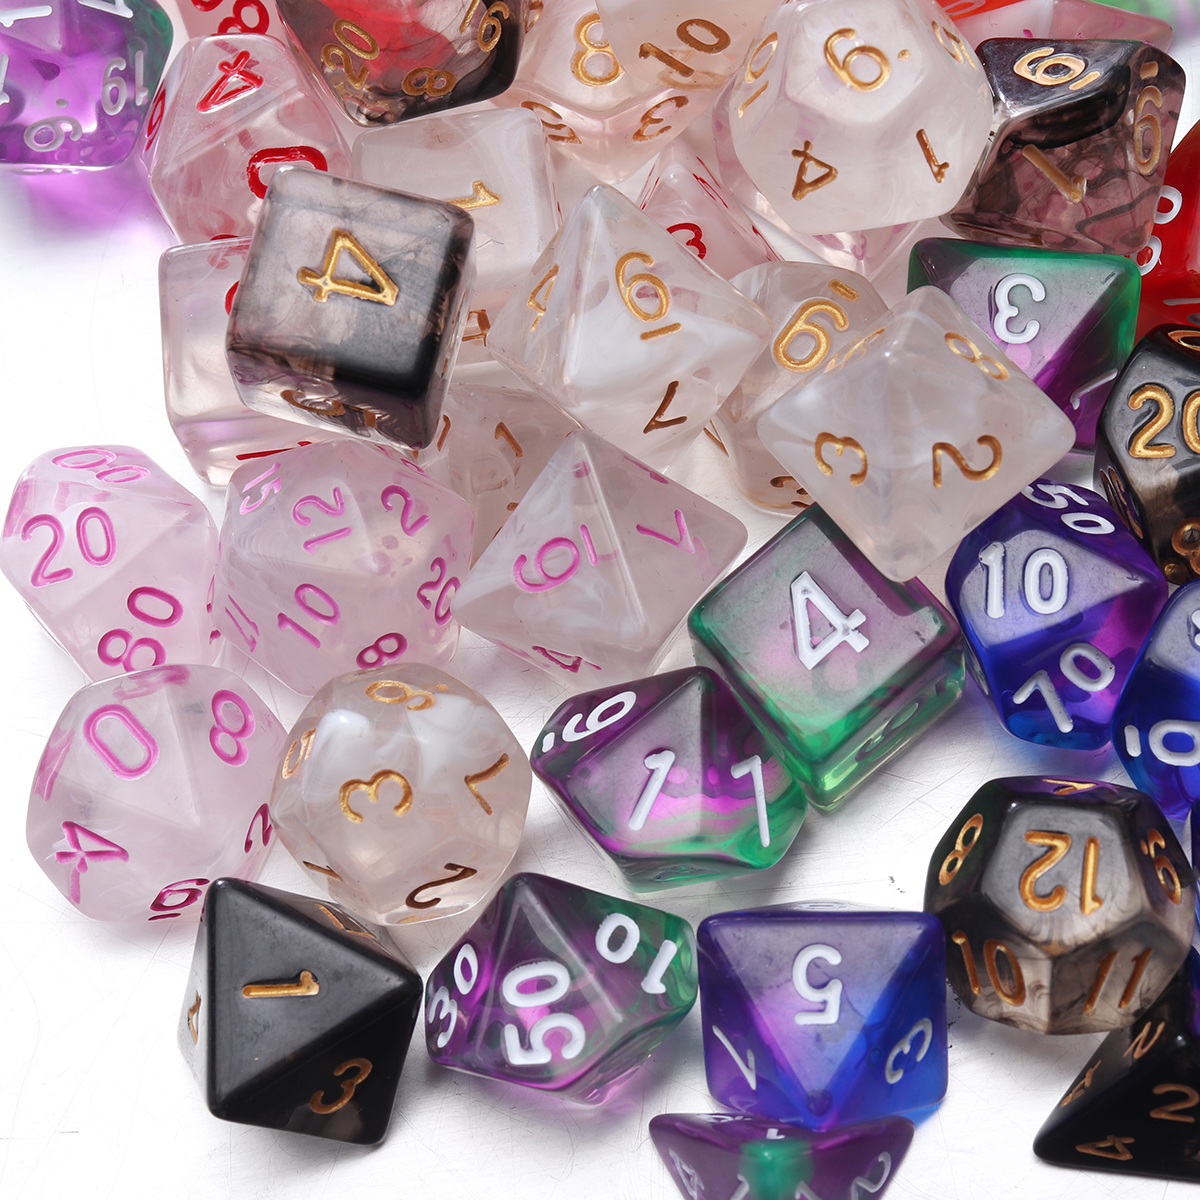 7pcs-Set-Embossed-Polyhedral-Dices-DND-RPG-MTG-Role-Playing-Board-Game-Dices-Set-1627969-2